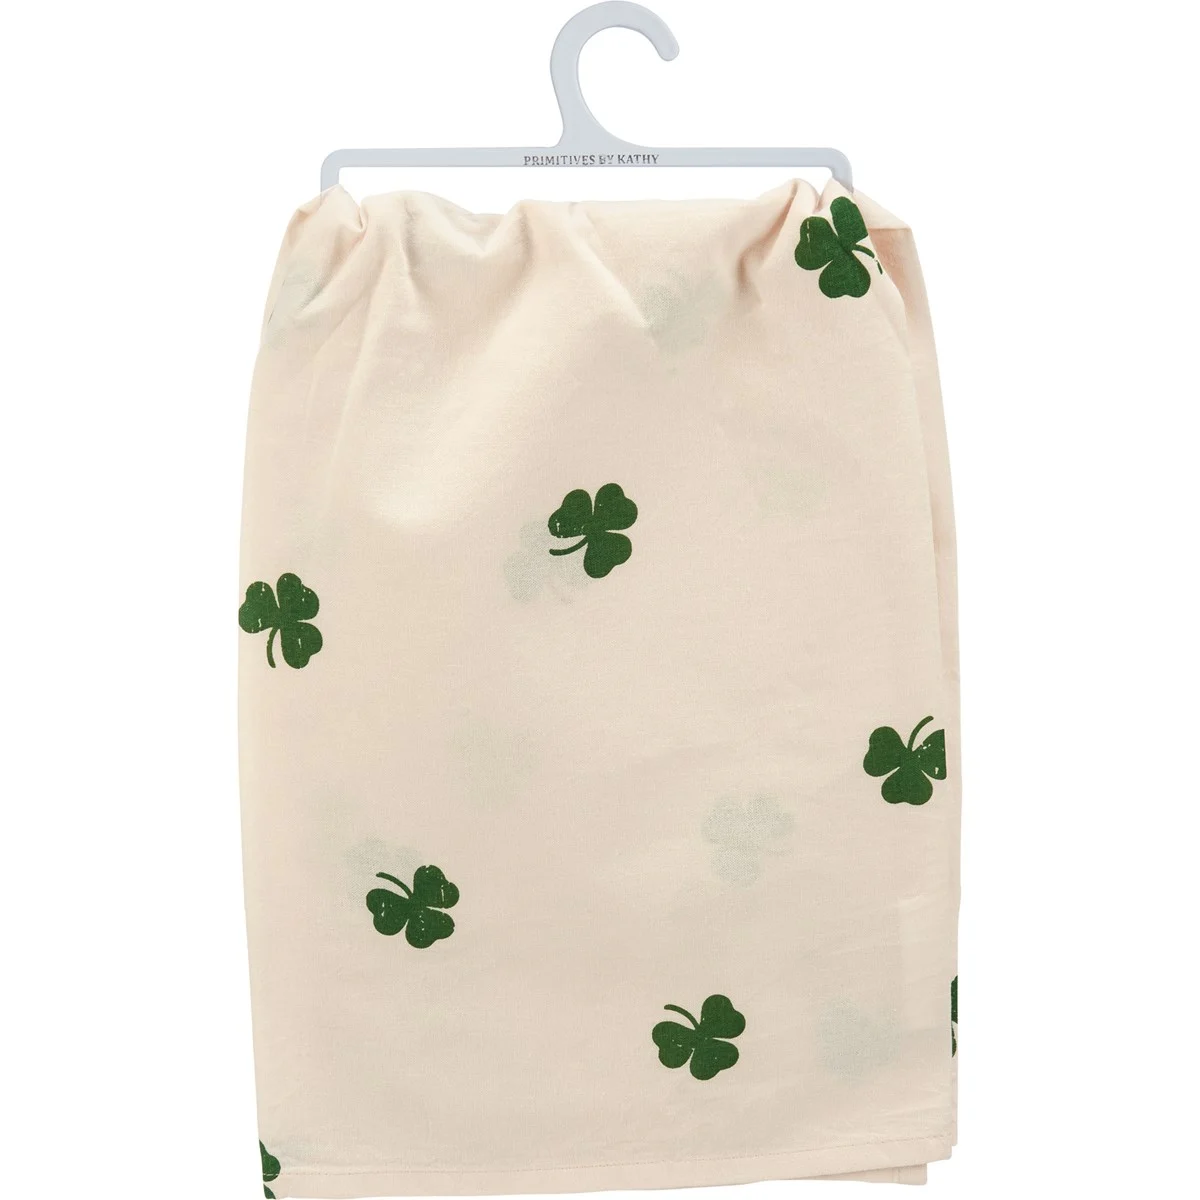 💙 Nothing But Happiness St Patrick's Day Kitchen Towel